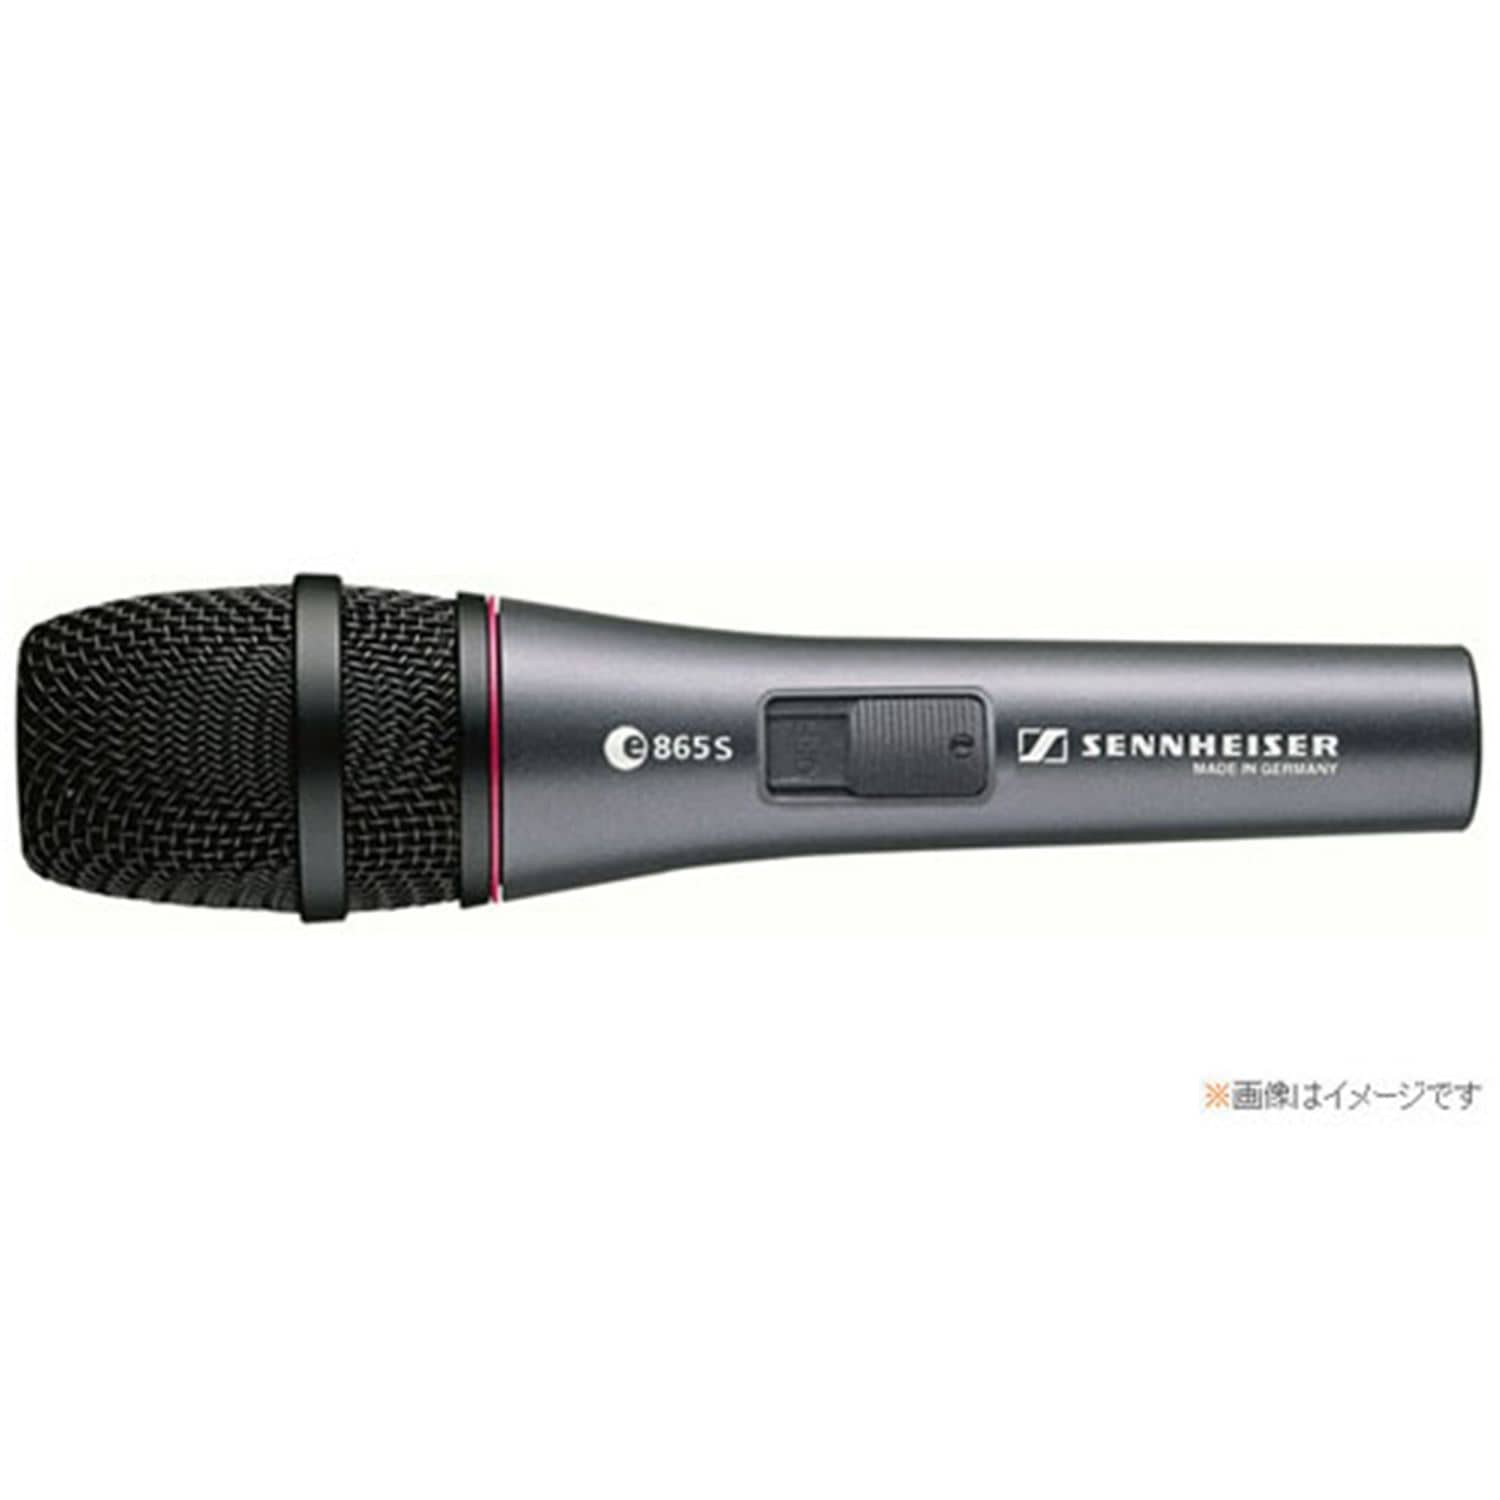 Sennheiser E865S Handheld Condenser Mic with Switch - ProSound and Stage Lighting